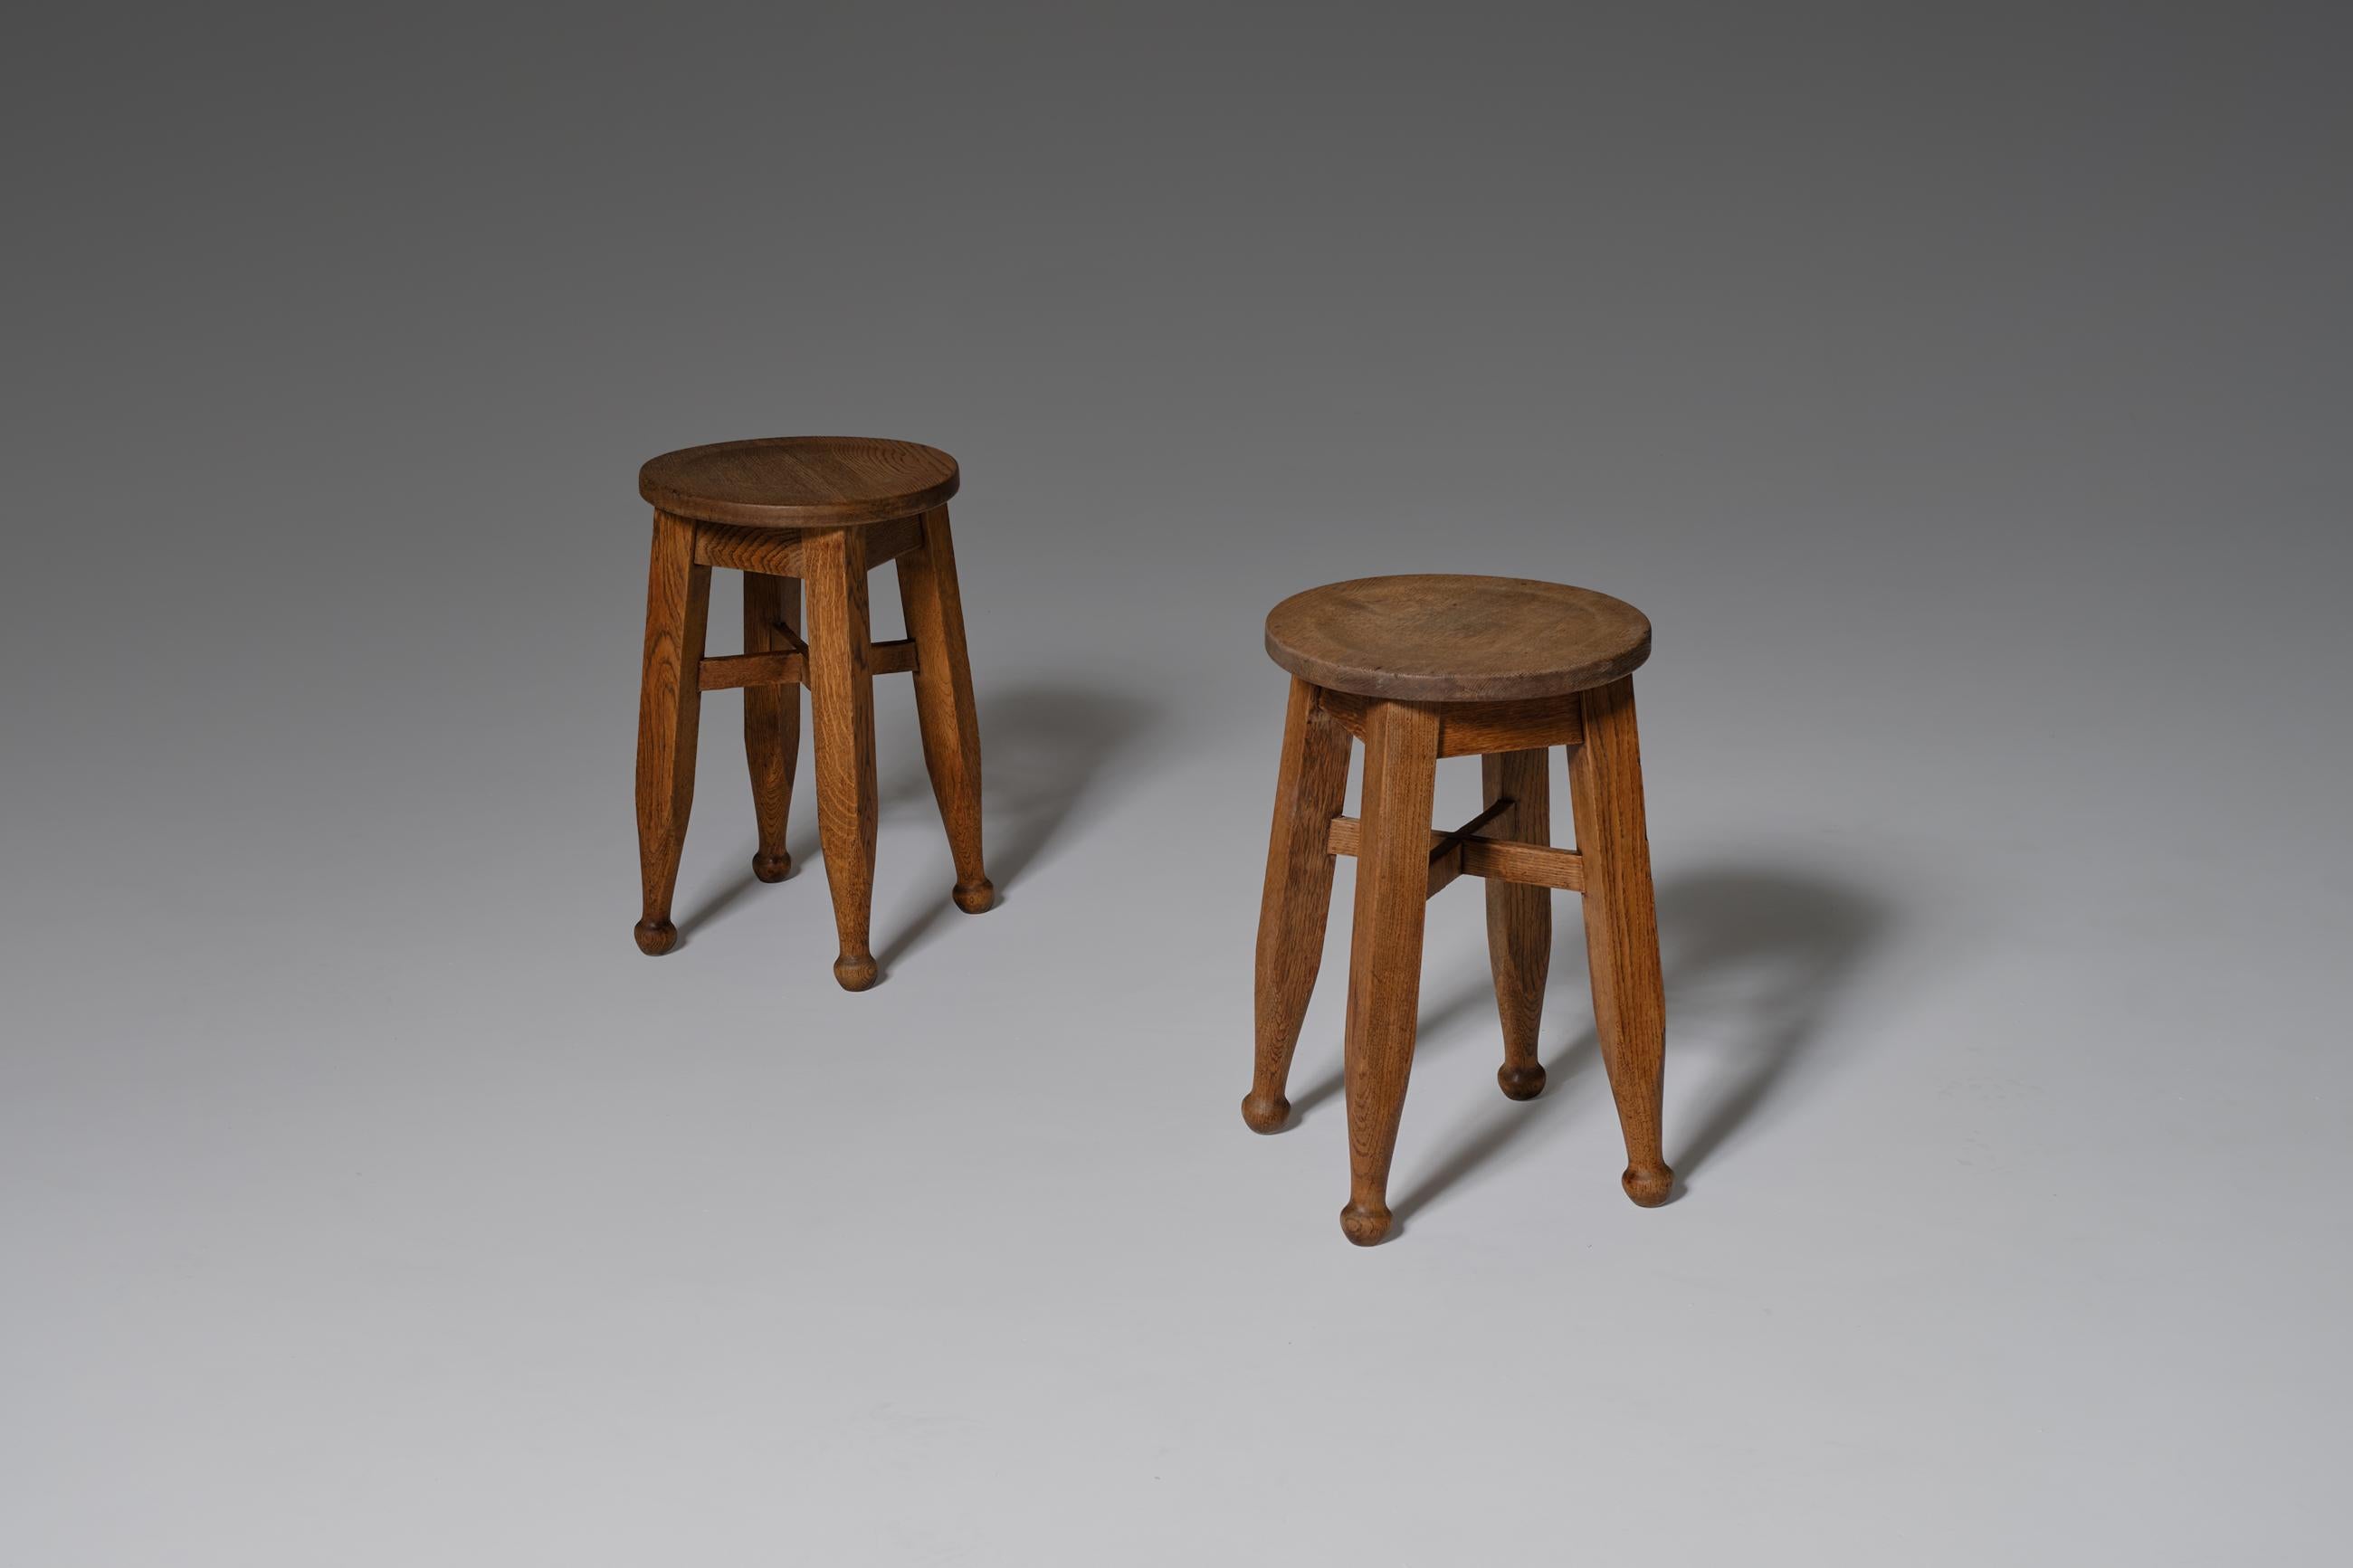 Pair of Arts & Crafts stools by Harold & Sheldon LTD Birmingham, England, early 20th century. Rough yet refined pair made in solid oak. The stools have nice crafted details such as the ball shaped legs, the cross construction and the nicely carved